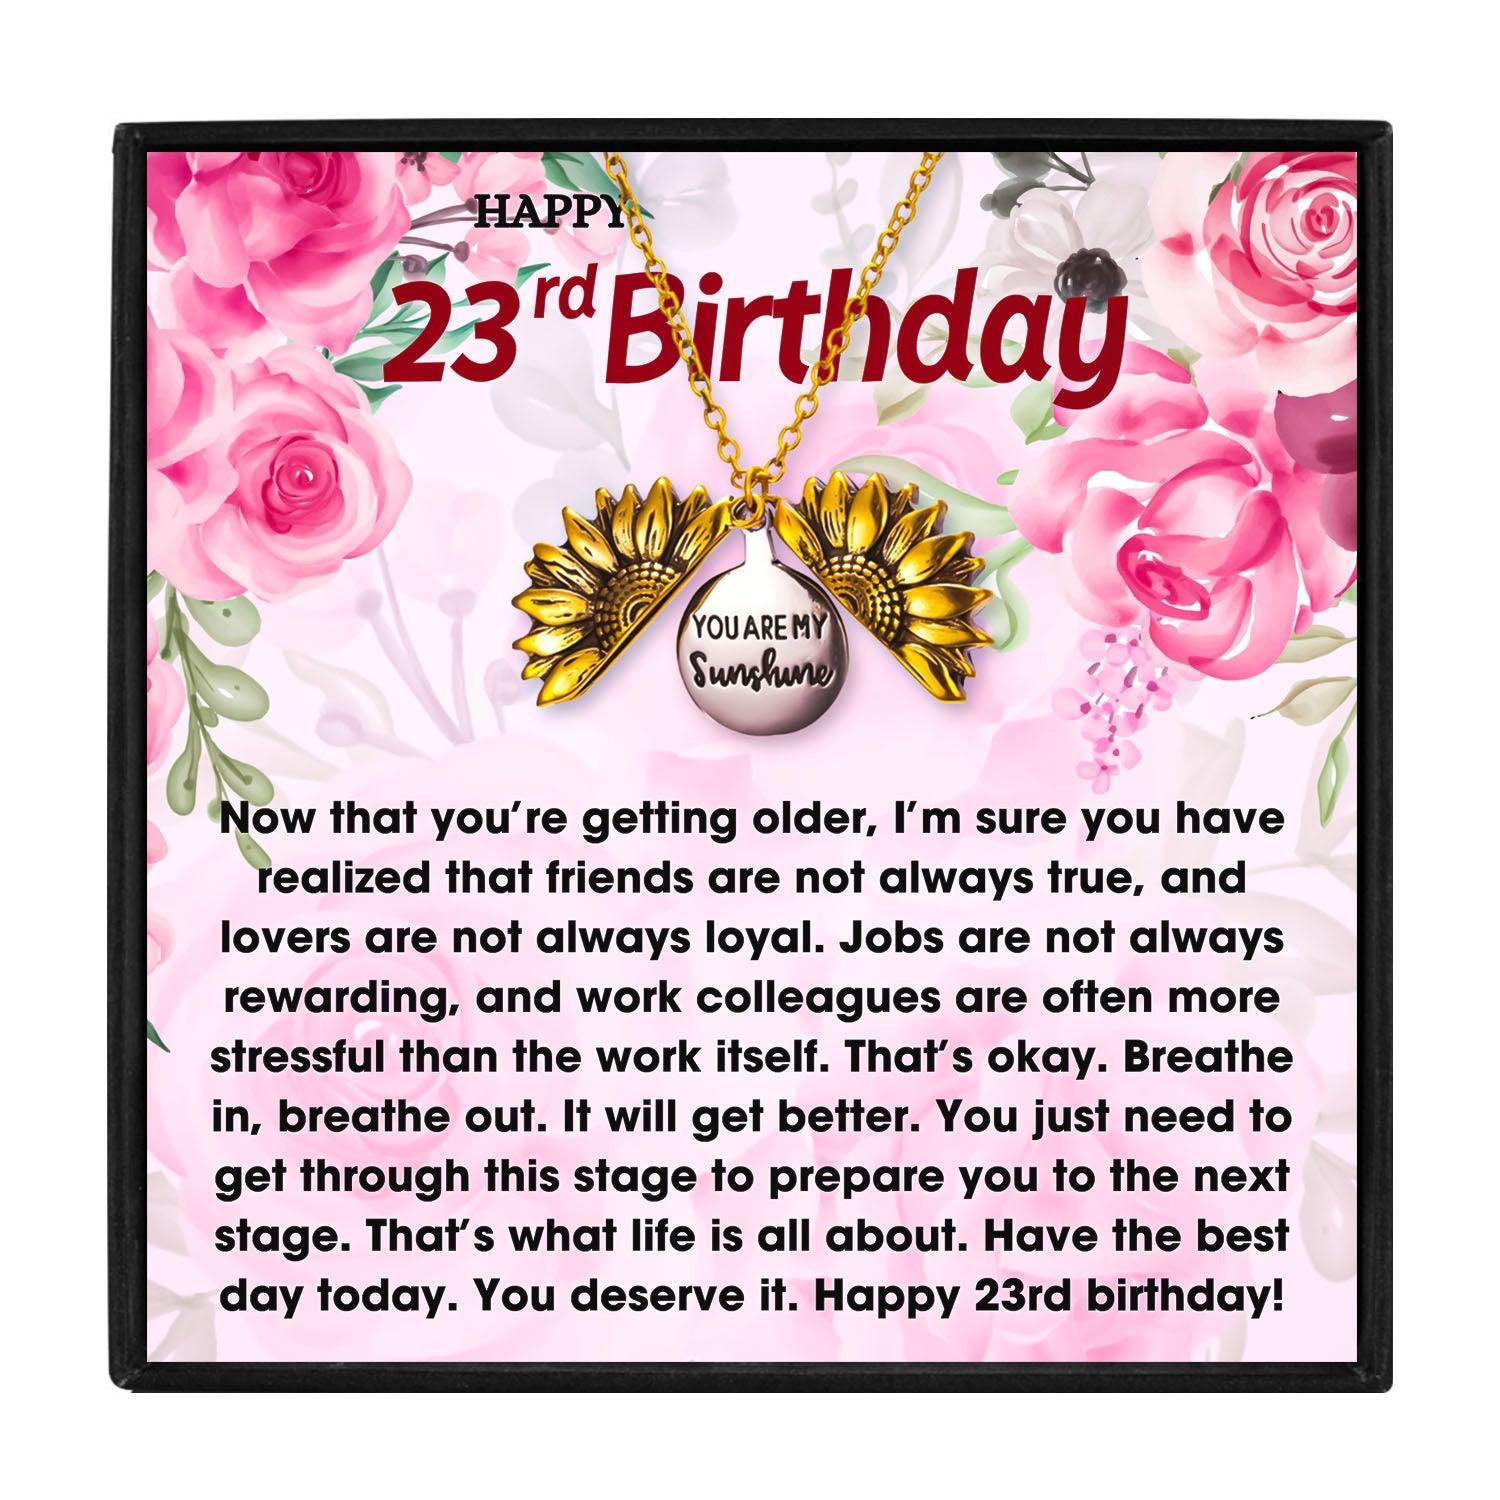 23rd Birthday Gifts Ideas for Girls and Women for Christmas 2023 | 23rd Birthday Gifts Ideas for Girls and Women - undefined | 23 birthday gift, 23rd birthday gift ideas, 23rd birthday ideas for her | From Hunny Life | hunnylife.com